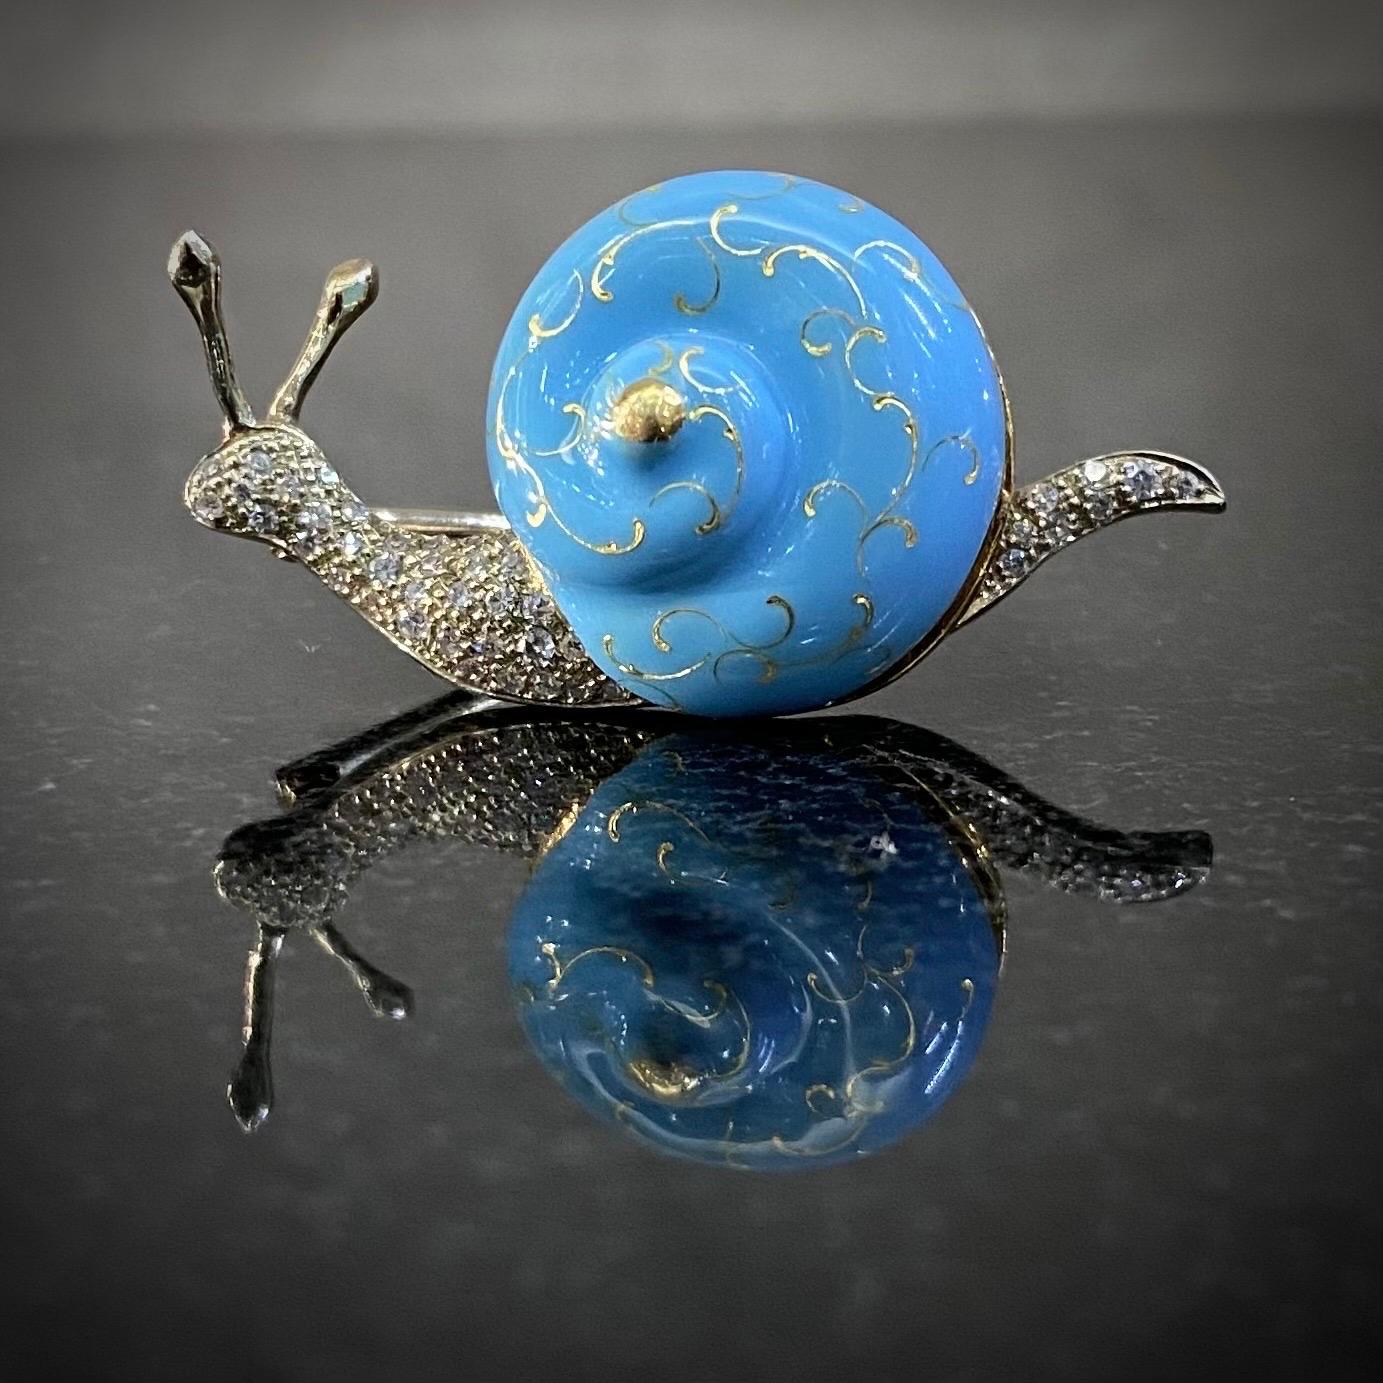 Mid-Century diamond and turquoise-blue enamel snail brooch in 19.2kt yellow and white gold, Portugal, circa 1960. The shell displaying a beautiful sky-blue color resembling the renowned “Tiffany blue” and accented with yellow gold scrolled motifs,